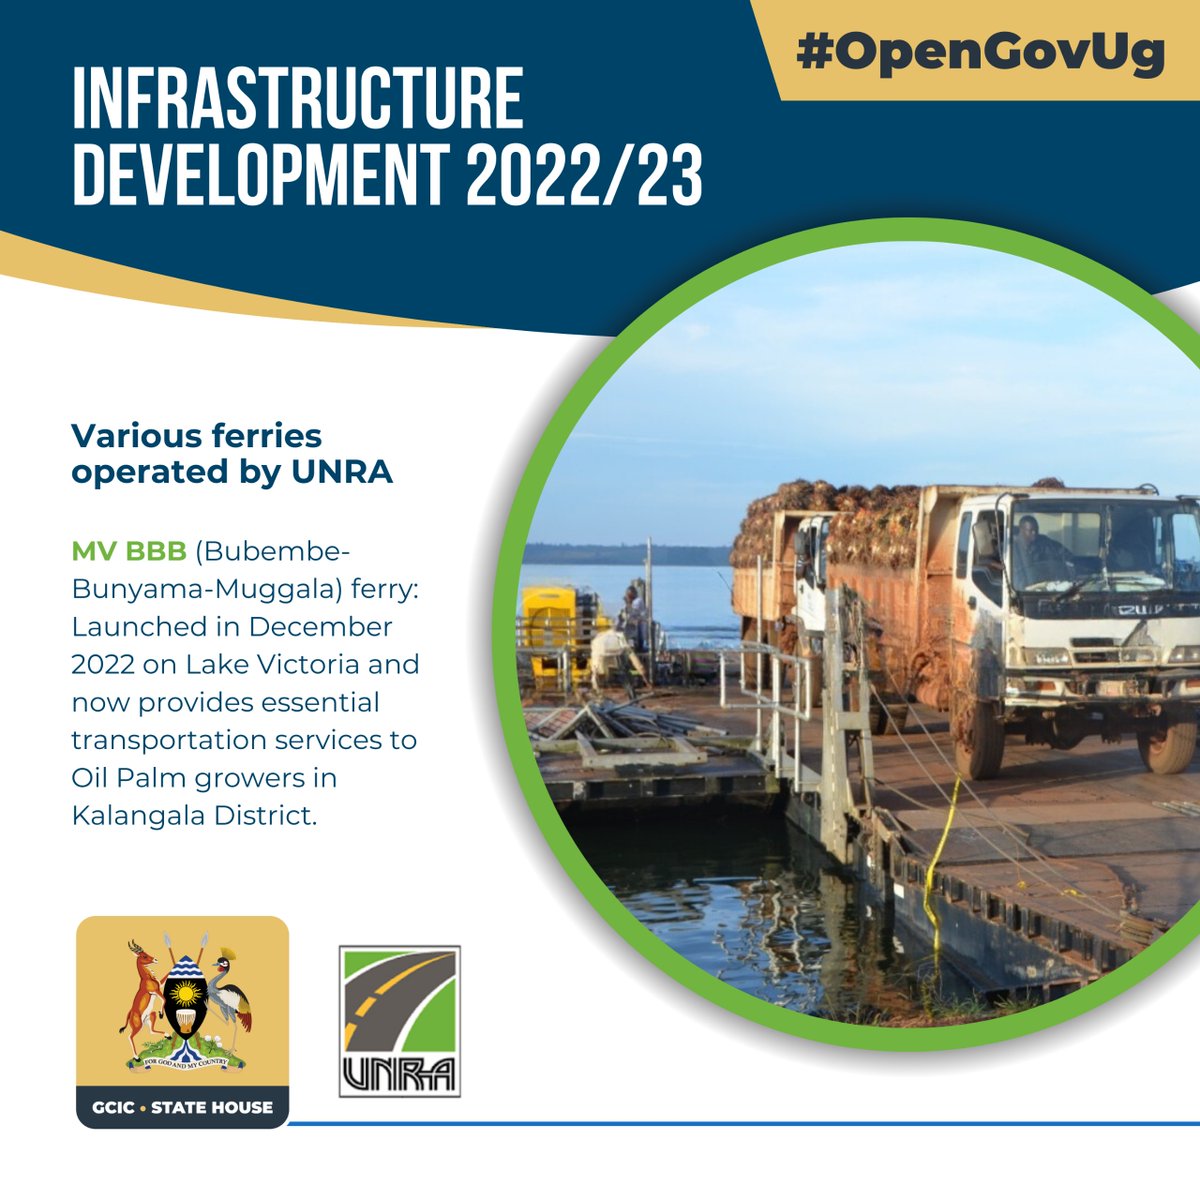 𝐈𝐍𝐅𝐑𝐀𝐒𝐓𝐑𝐔𝐂𝐓𝐔𝐑𝐄 𝐃𝐄𝐕𝐄𝐋𝐎𝐏𝐌𝐄𝐍𝐓 The MV BBB Ferry, launched in December 2022 on Lake Victoria, serves essential transportation needs for Oil Palm growers in Kalangala District along the Bugembe-Bunyana-Muggala route.#OpenGovUg